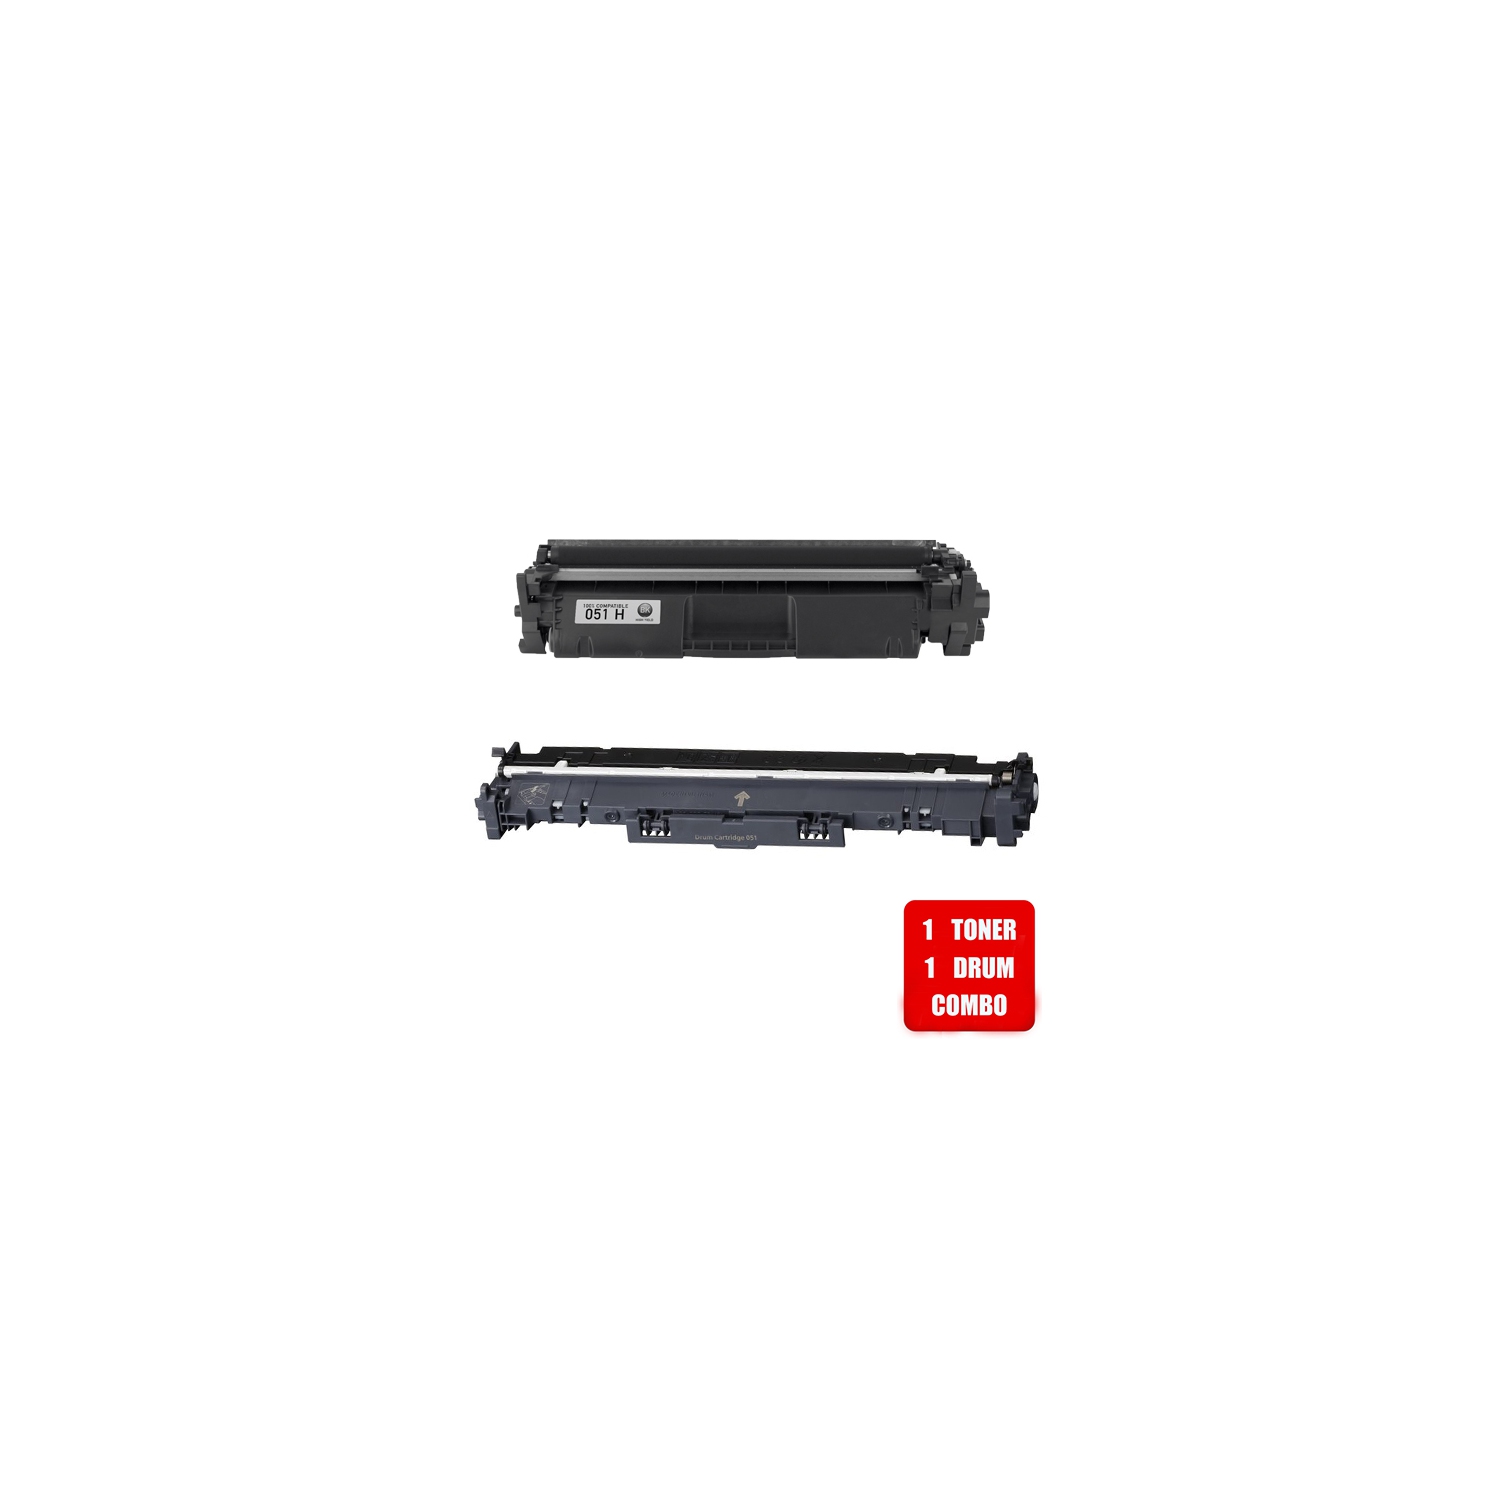 Prime 1TONER DRUM PACK - Canon 051/Canon-051H Drum Unit Use With Canon 051 Toner # FREE SHIPPING